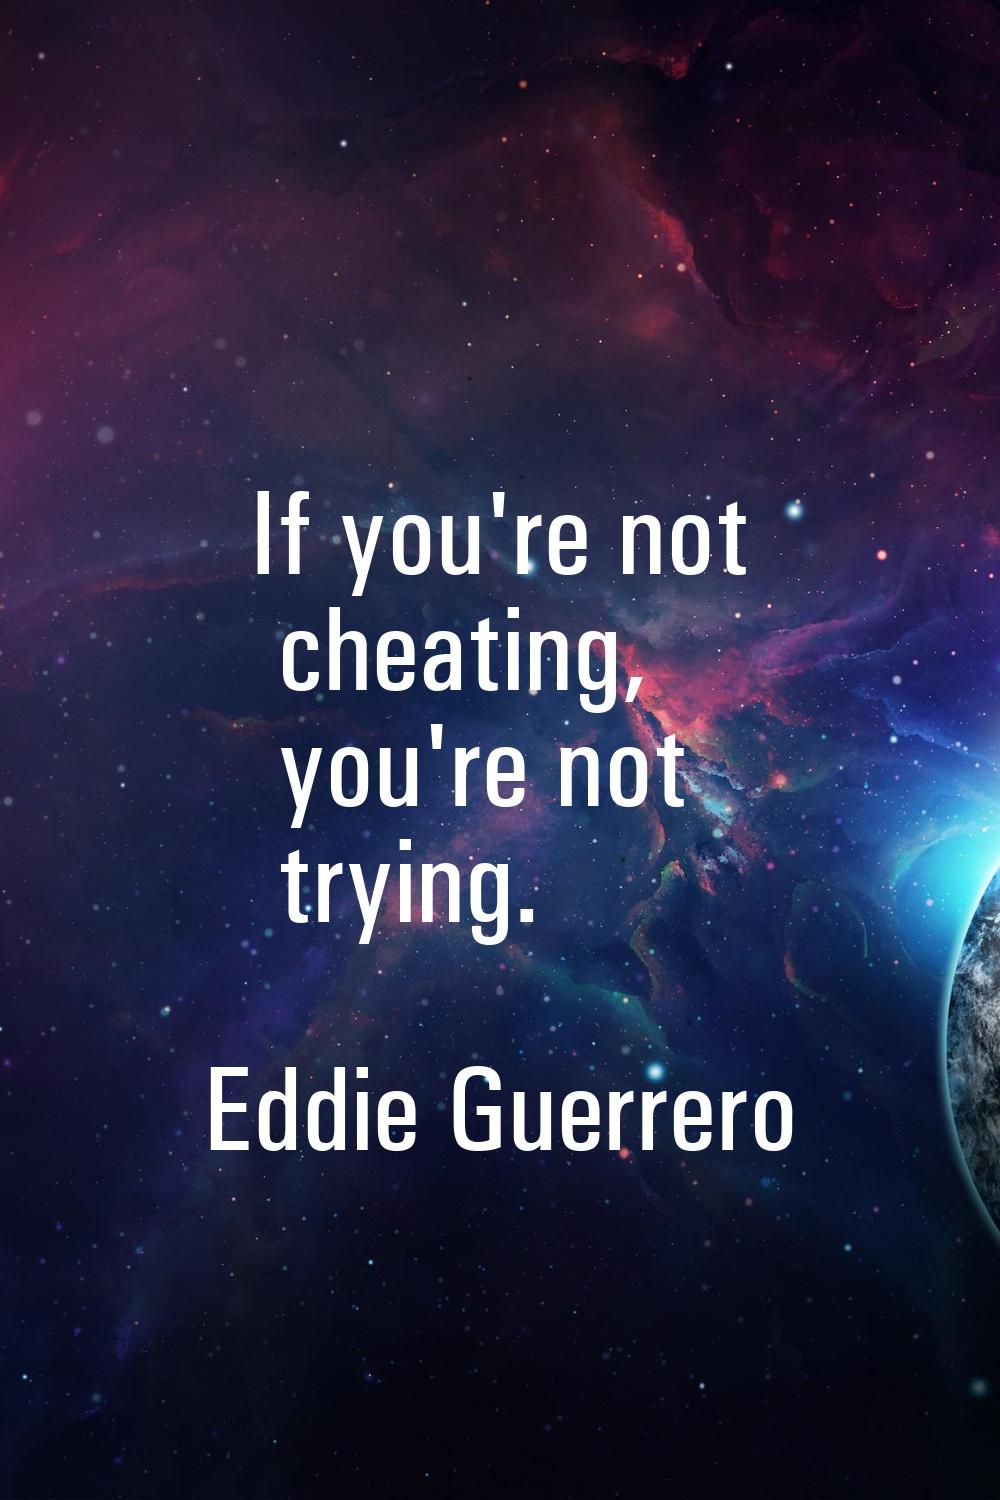 If you're not cheating, you're not trying.